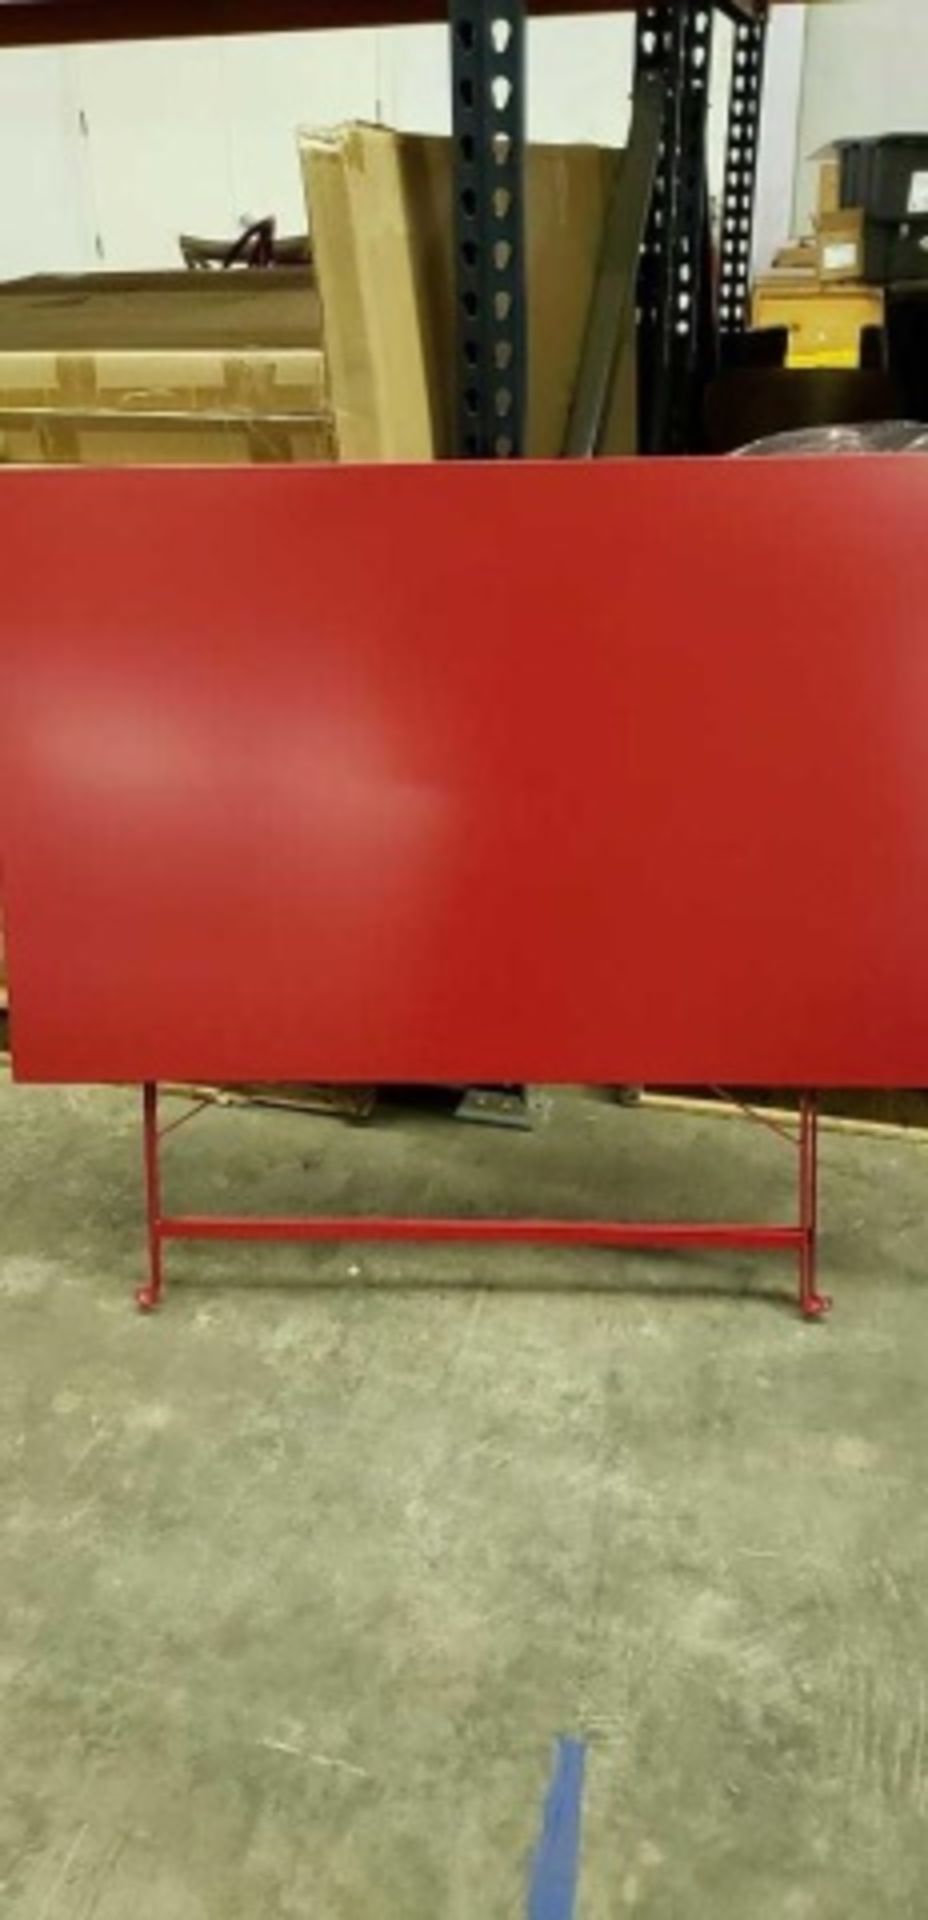 Jardin Rectangle Folding Table - STTA0009- R (red). ElectroZinc treated steel, powder coated. - Image 4 of 7